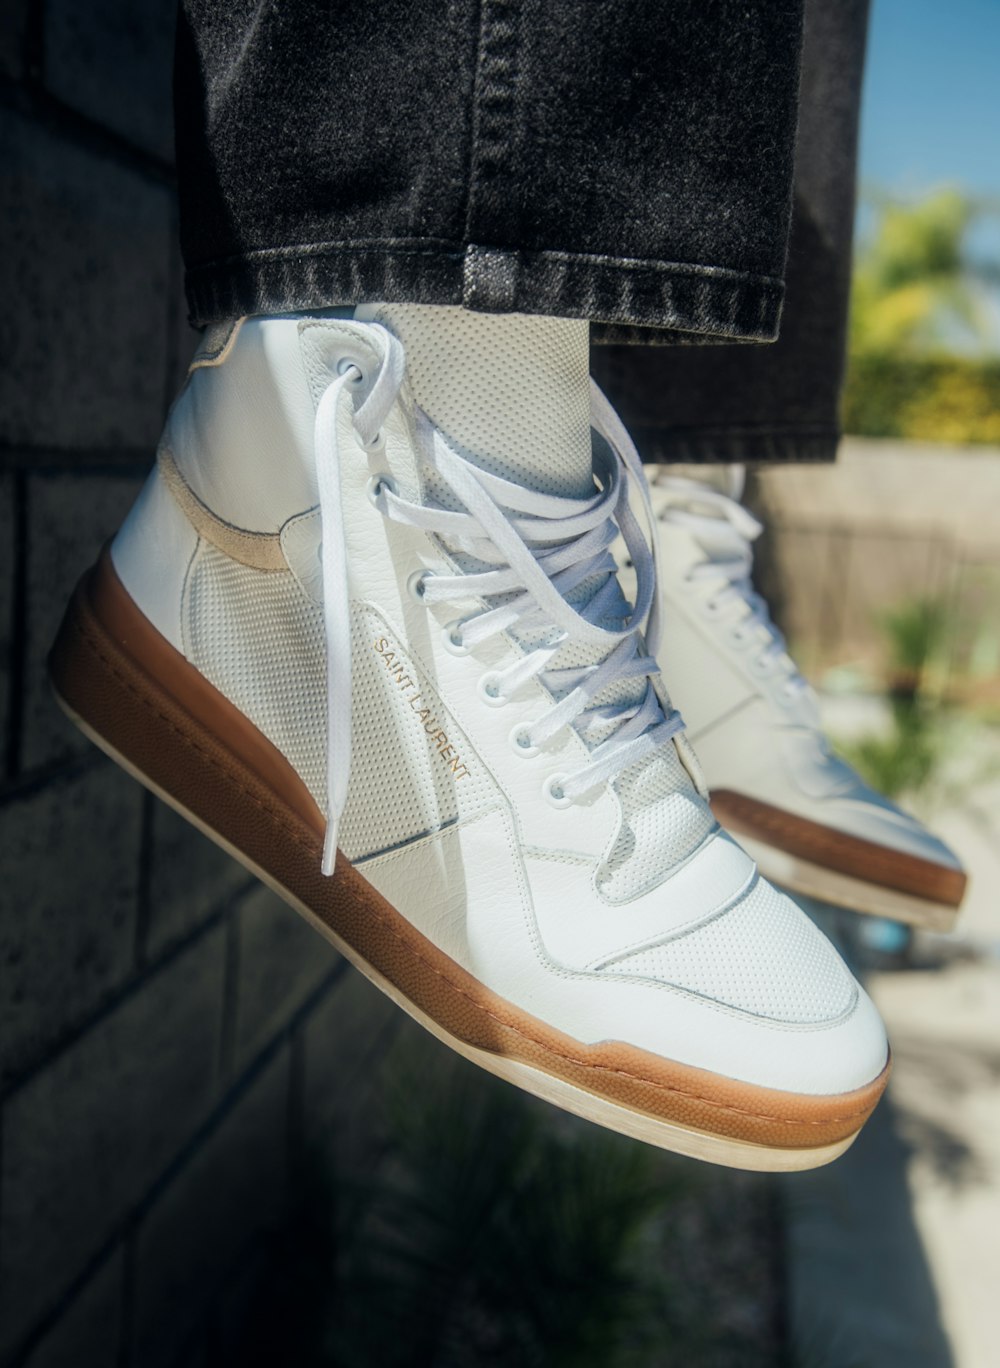 a person wearing a pair of white shoes photo – Free Skate Image on Unsplash